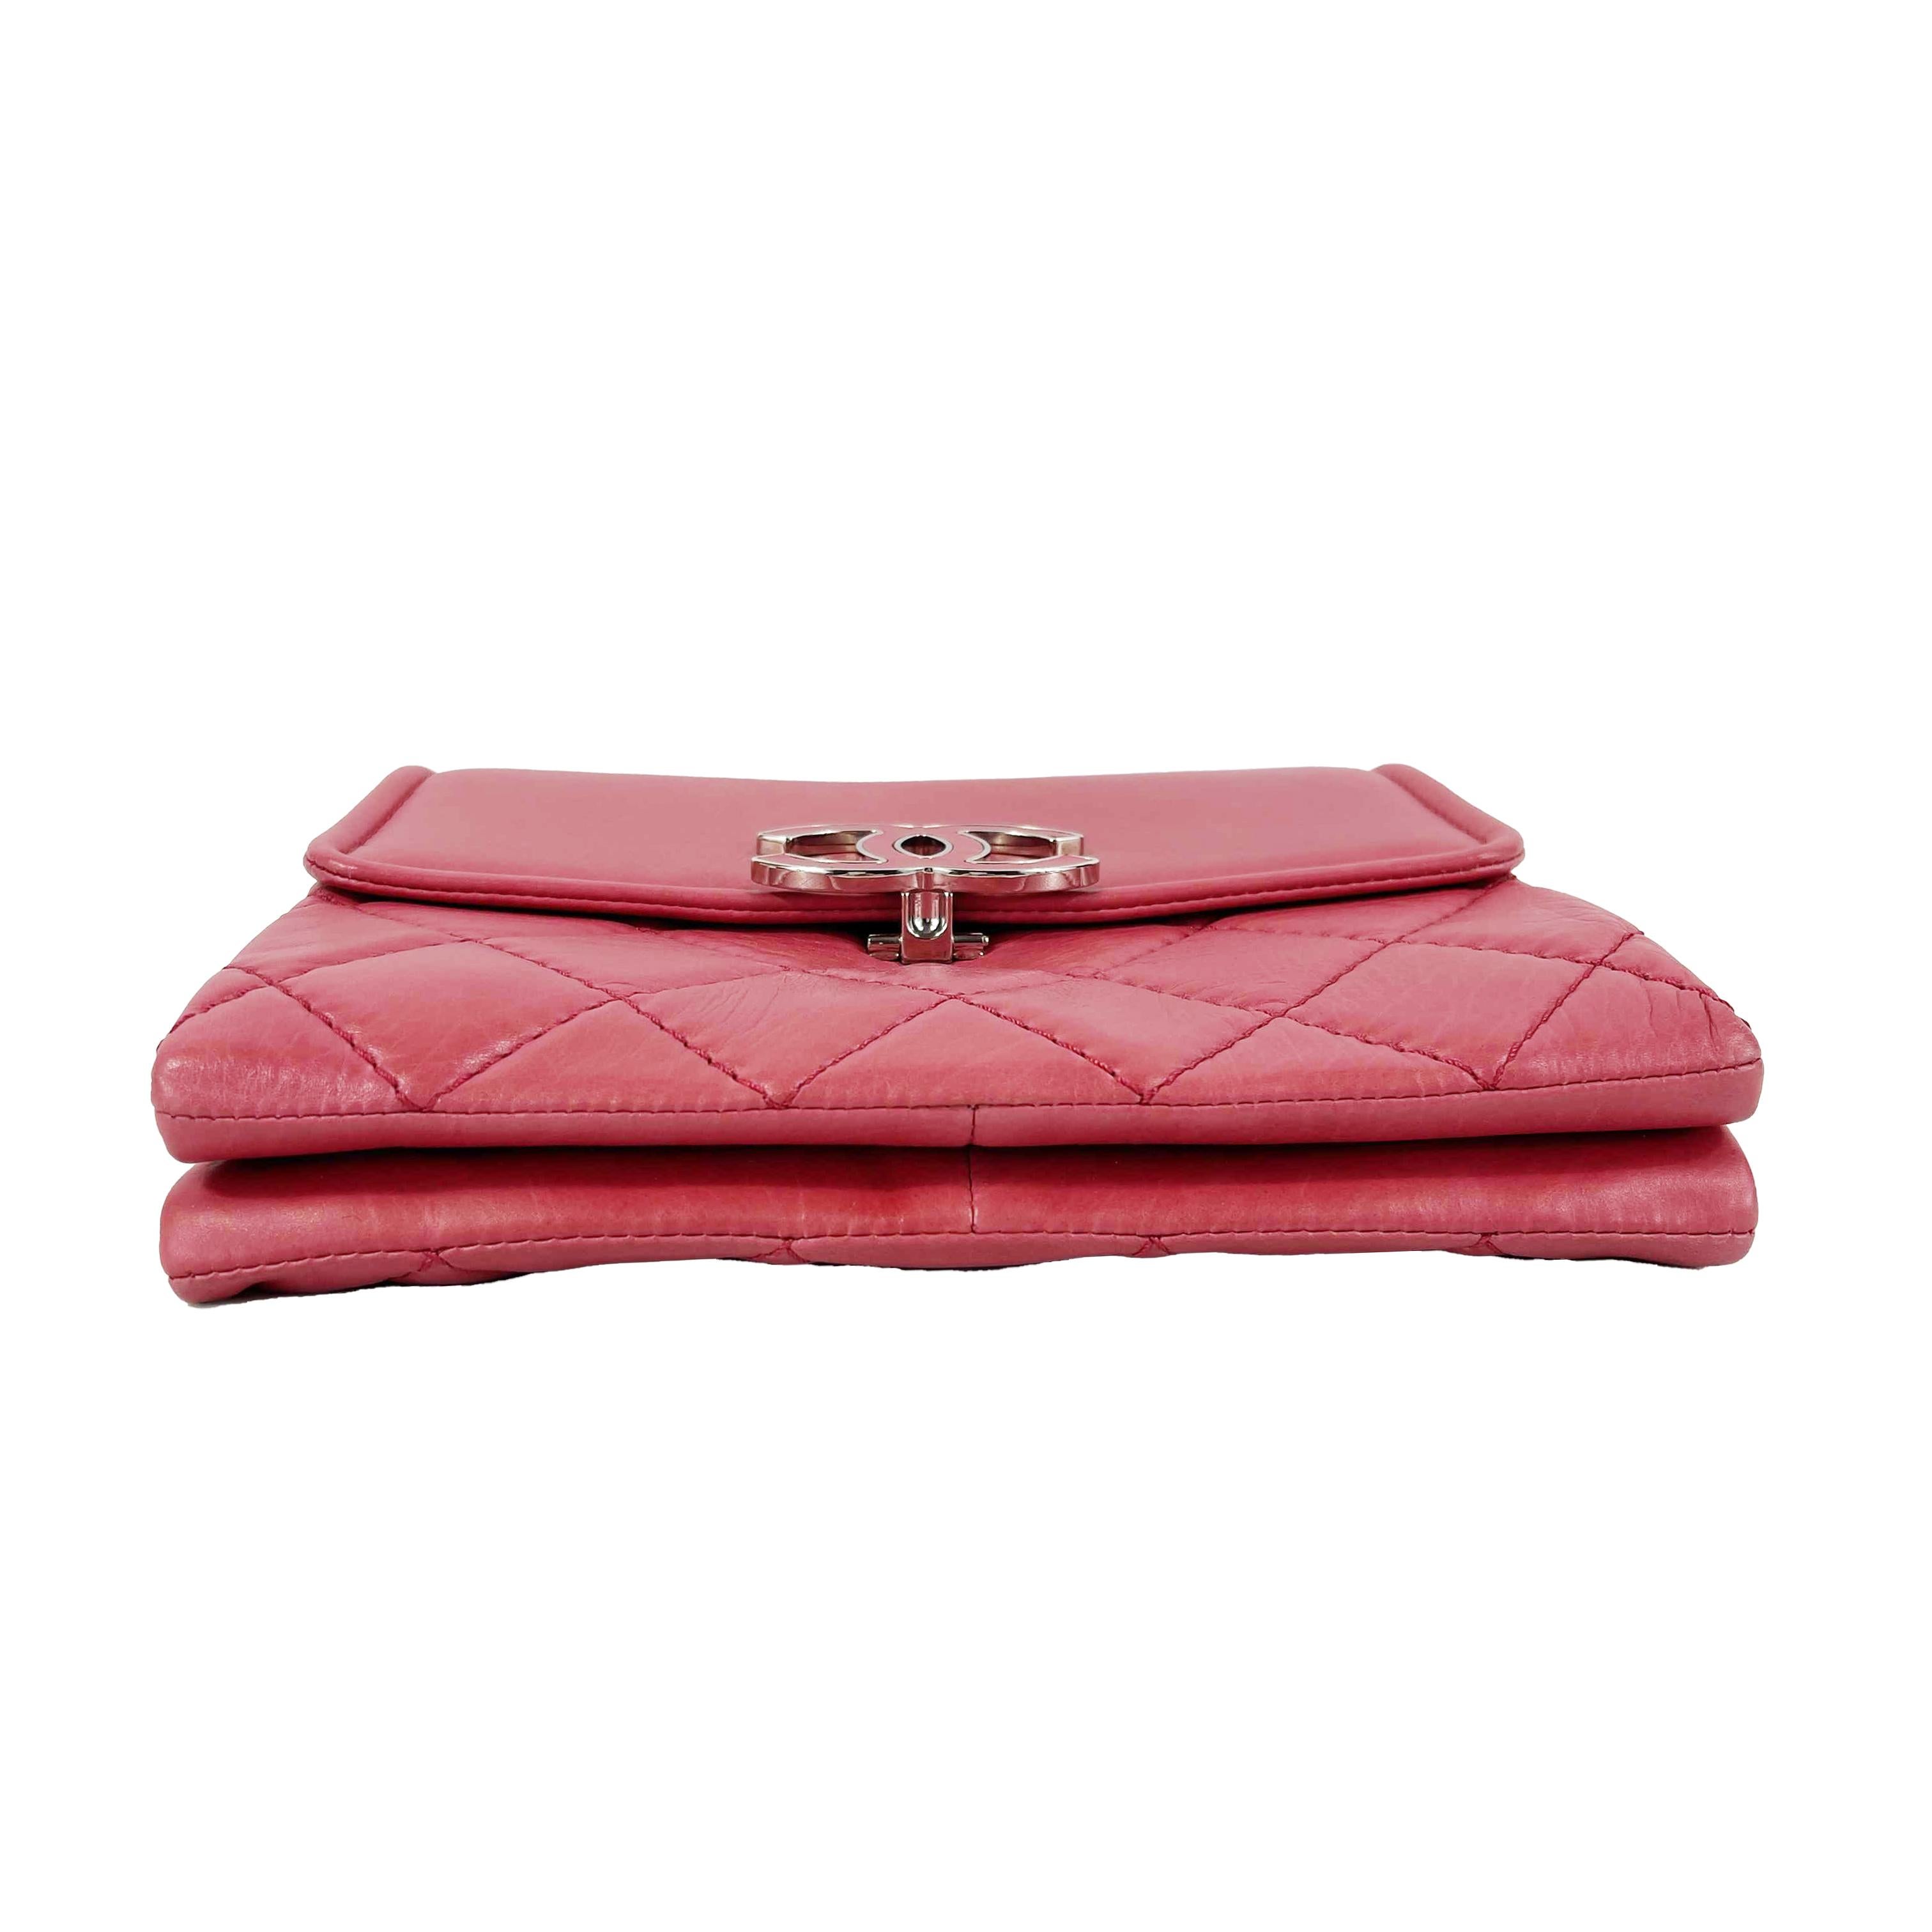 CHANEL Square Flap Quilted Lambskin Shoulder Crossbody Pink / Silver-tone In Excellent Condition For Sale In Sanford, FL